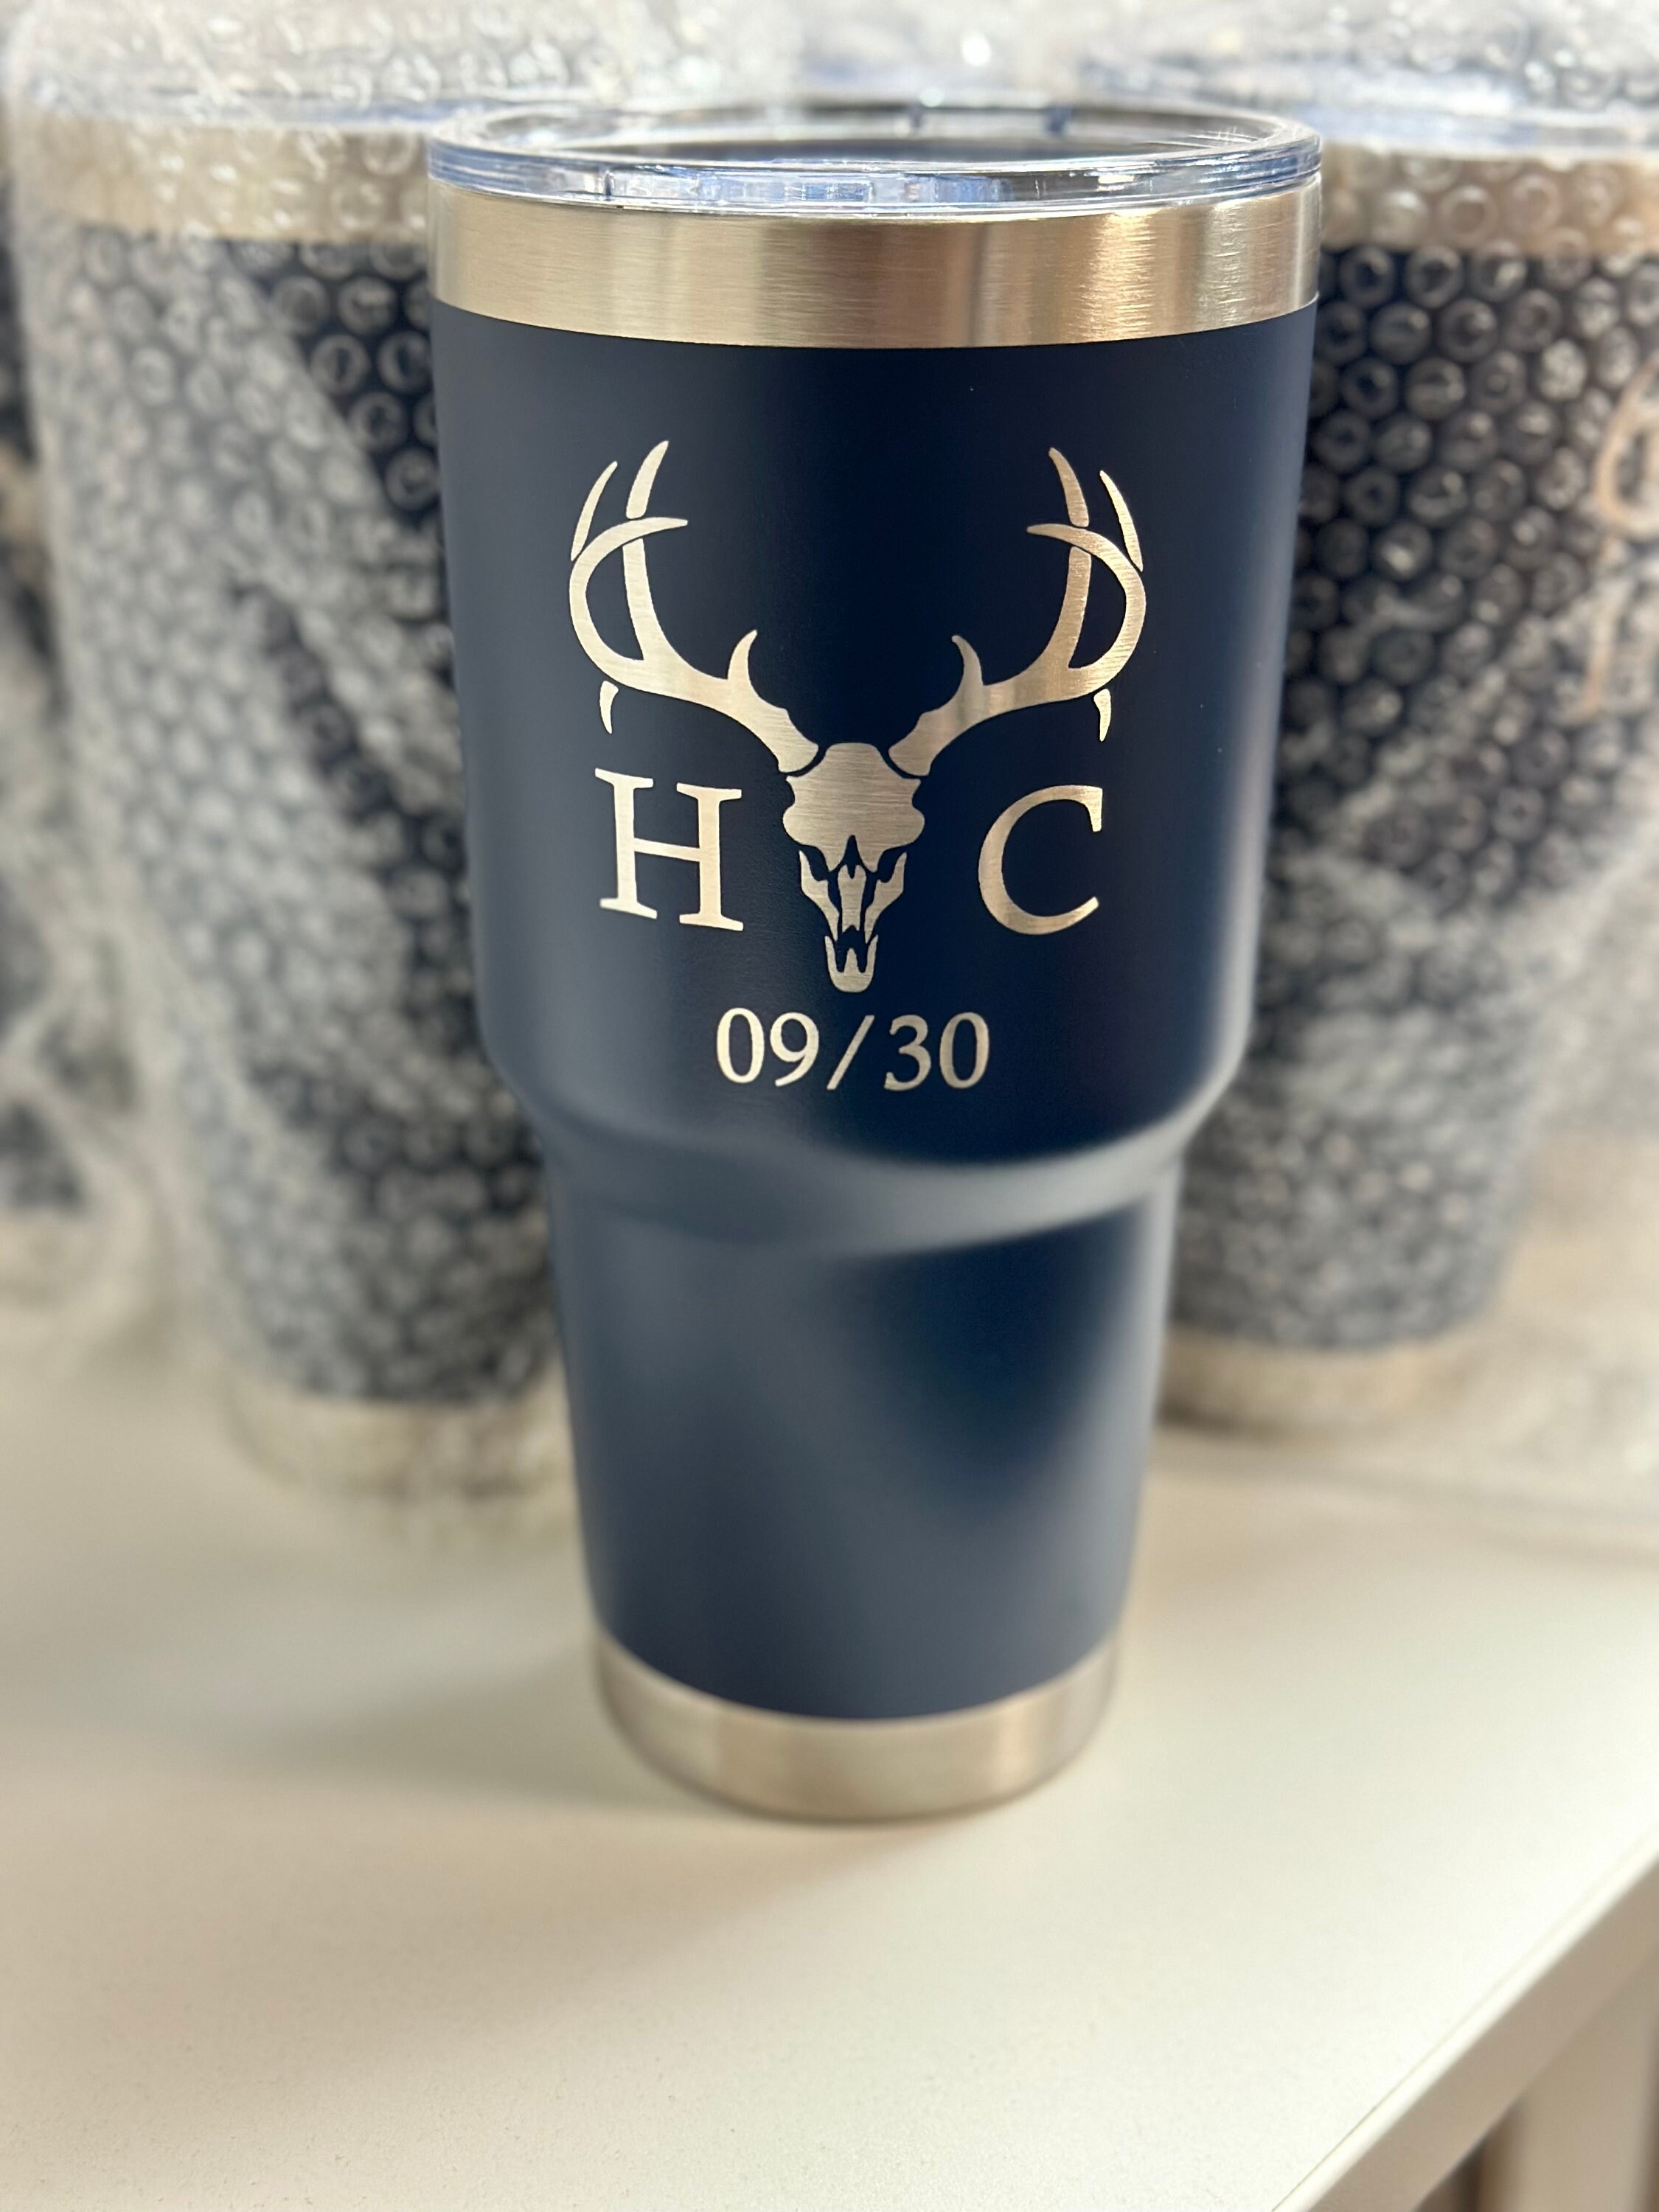 Bulk Personalized 30oz Tumbler, ADD YOUR LOGO, Powder Coated, Laser  Engraved Cup, Corporate Gift, Branded, Wholesale Tumblers, Bulk Tumblers 